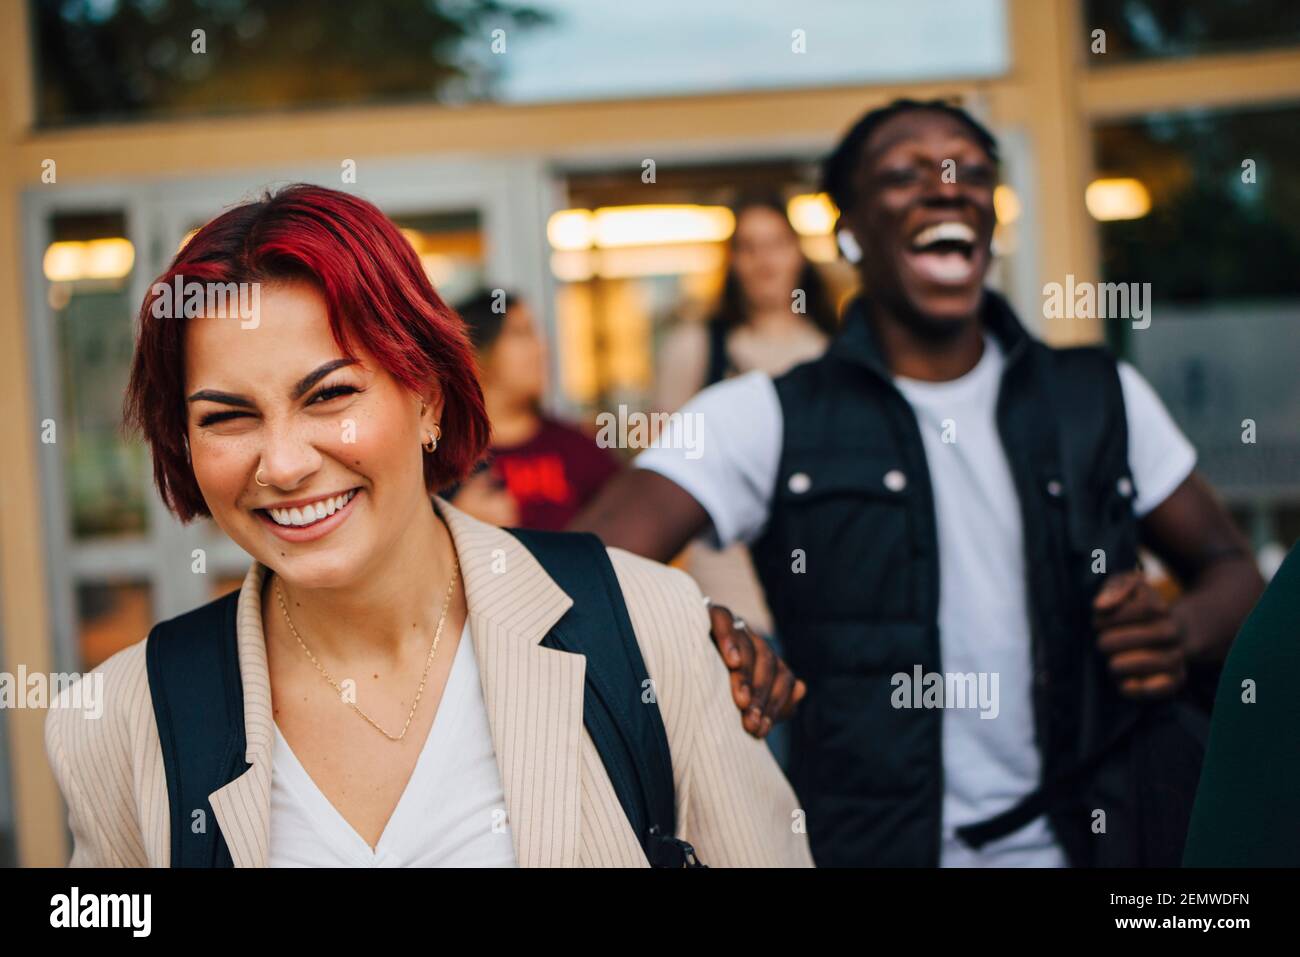 Redhead female student laughing with friends during sunset Stock Photo